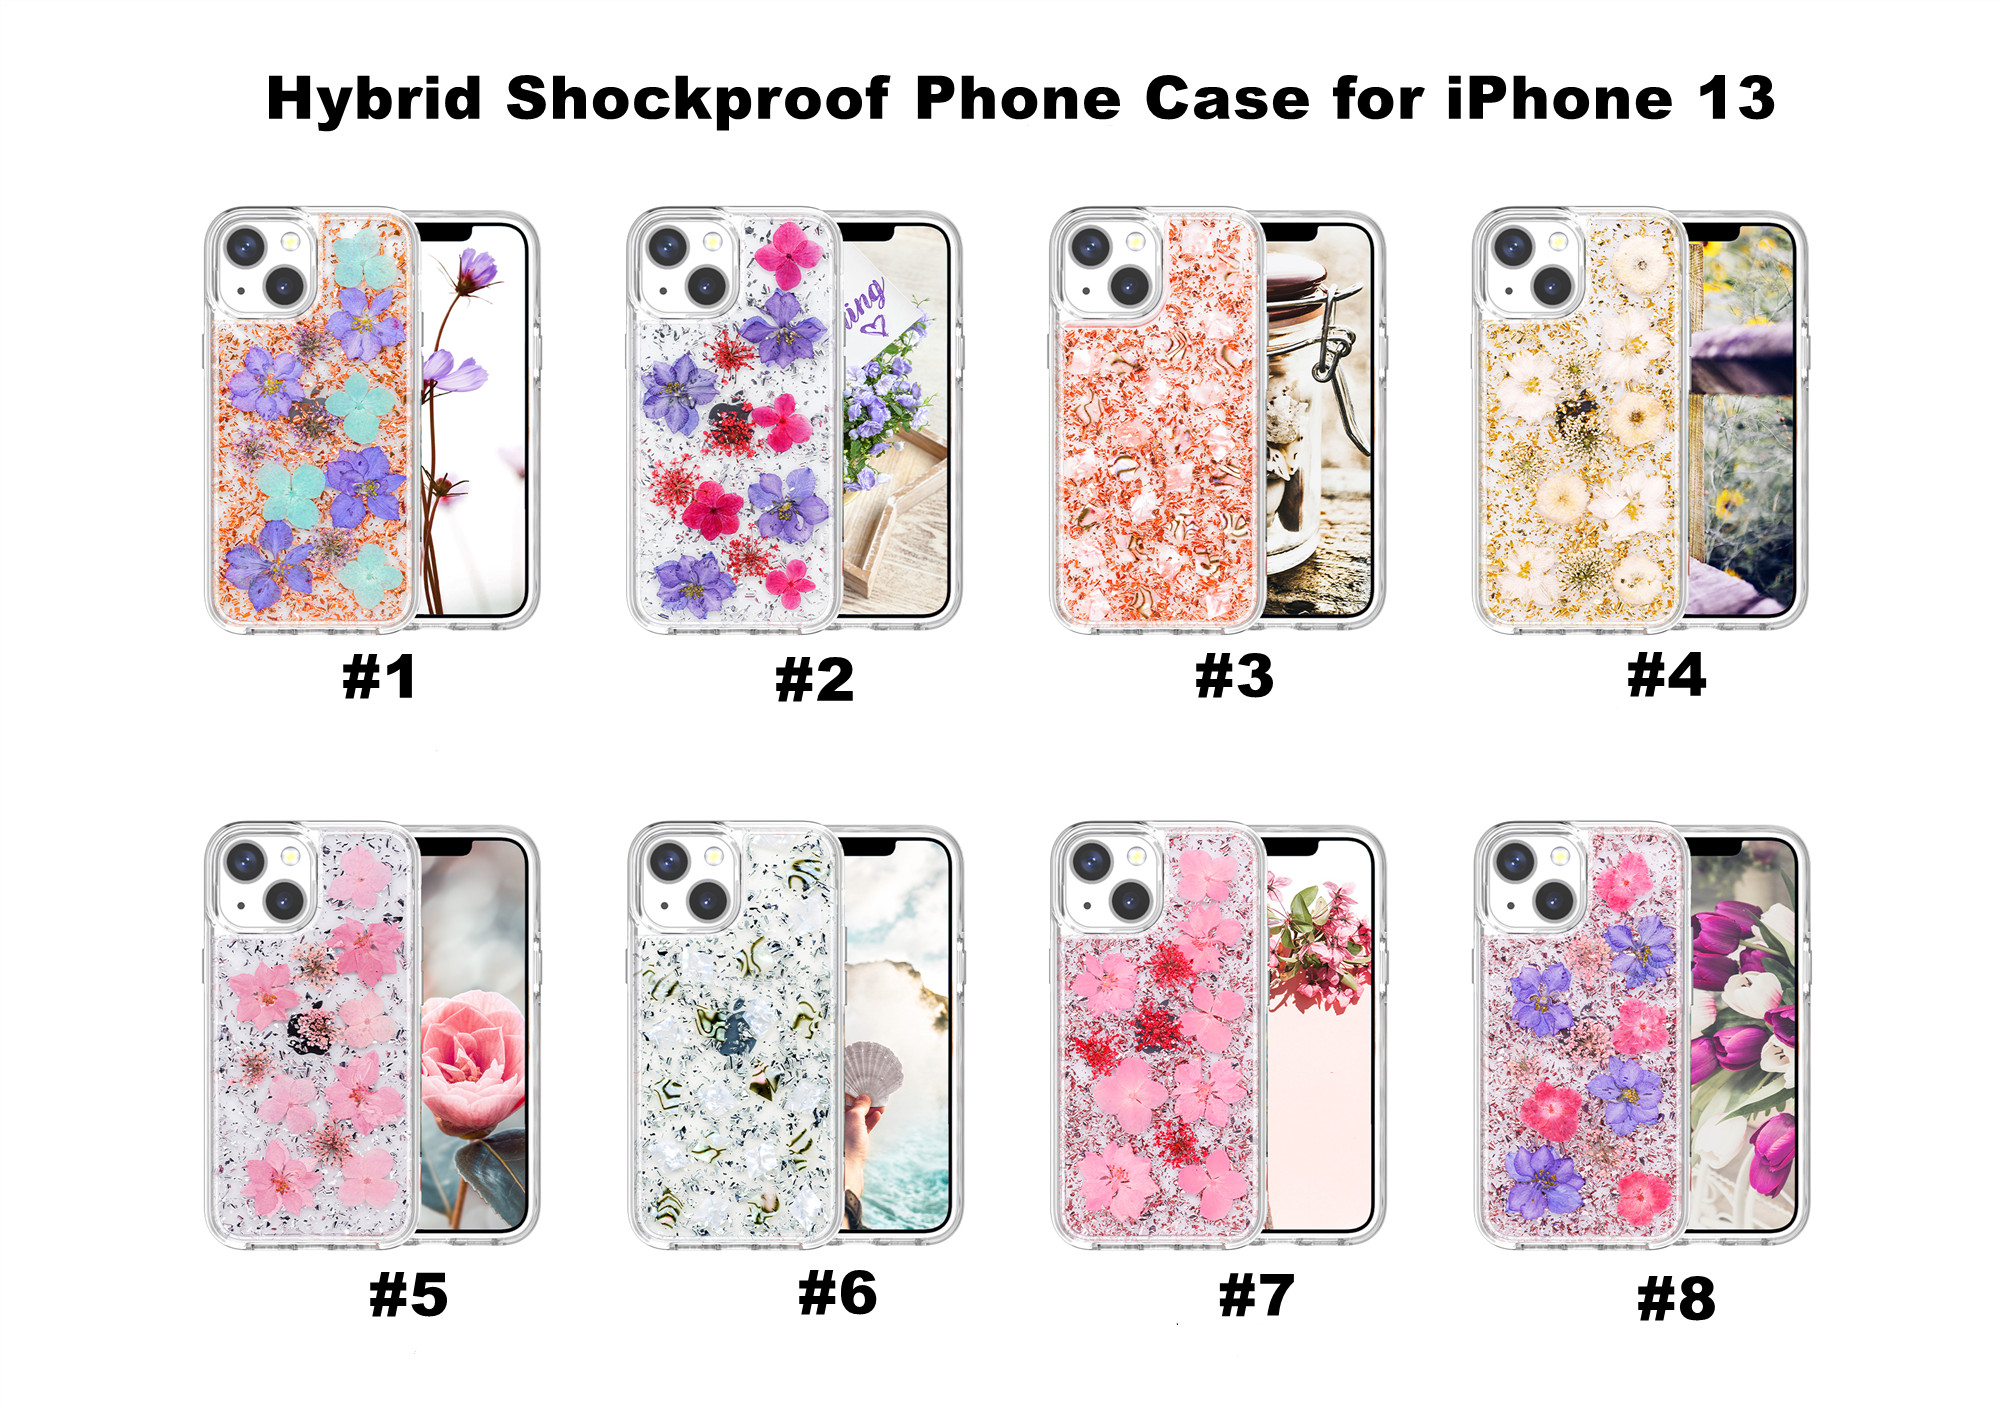 Mobile Phone Case For iphone 13 Back Cover hybrid shockproof Kickstand Case For iphone 13 6.1 inch 2021